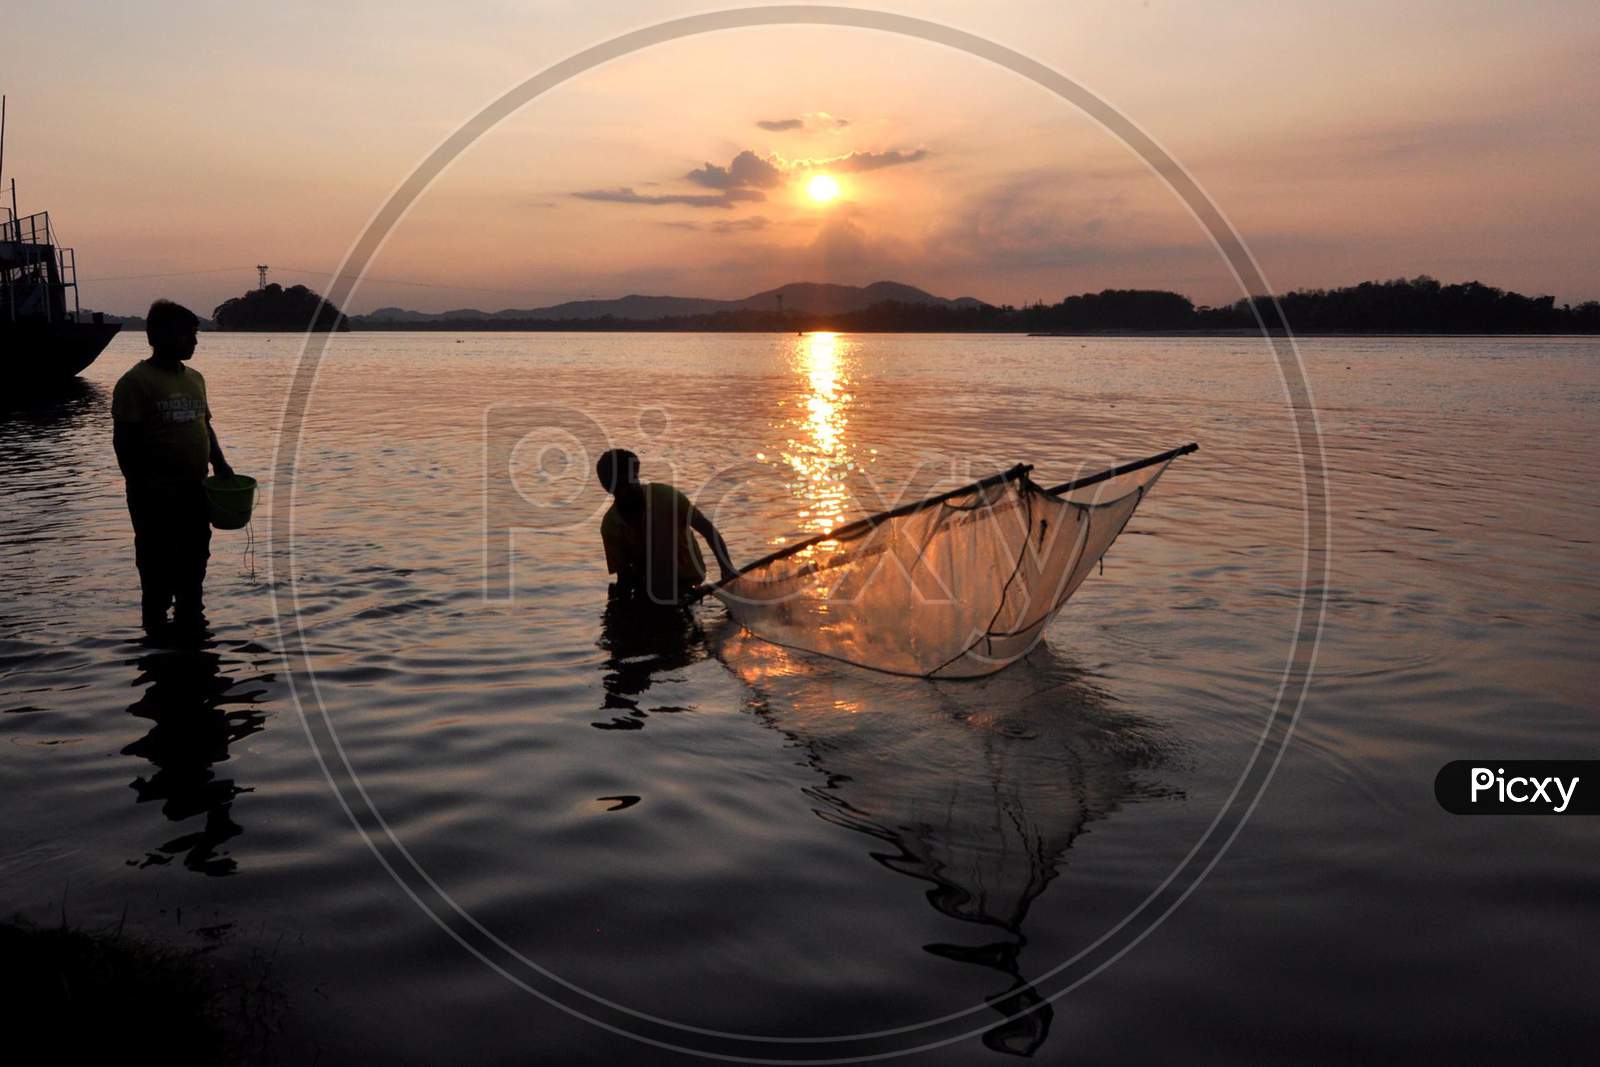 Man Catches Fish At The Banks Of The Brahmaputra River During Sunset  In Guwahati, Saturday, May 9, 2020.